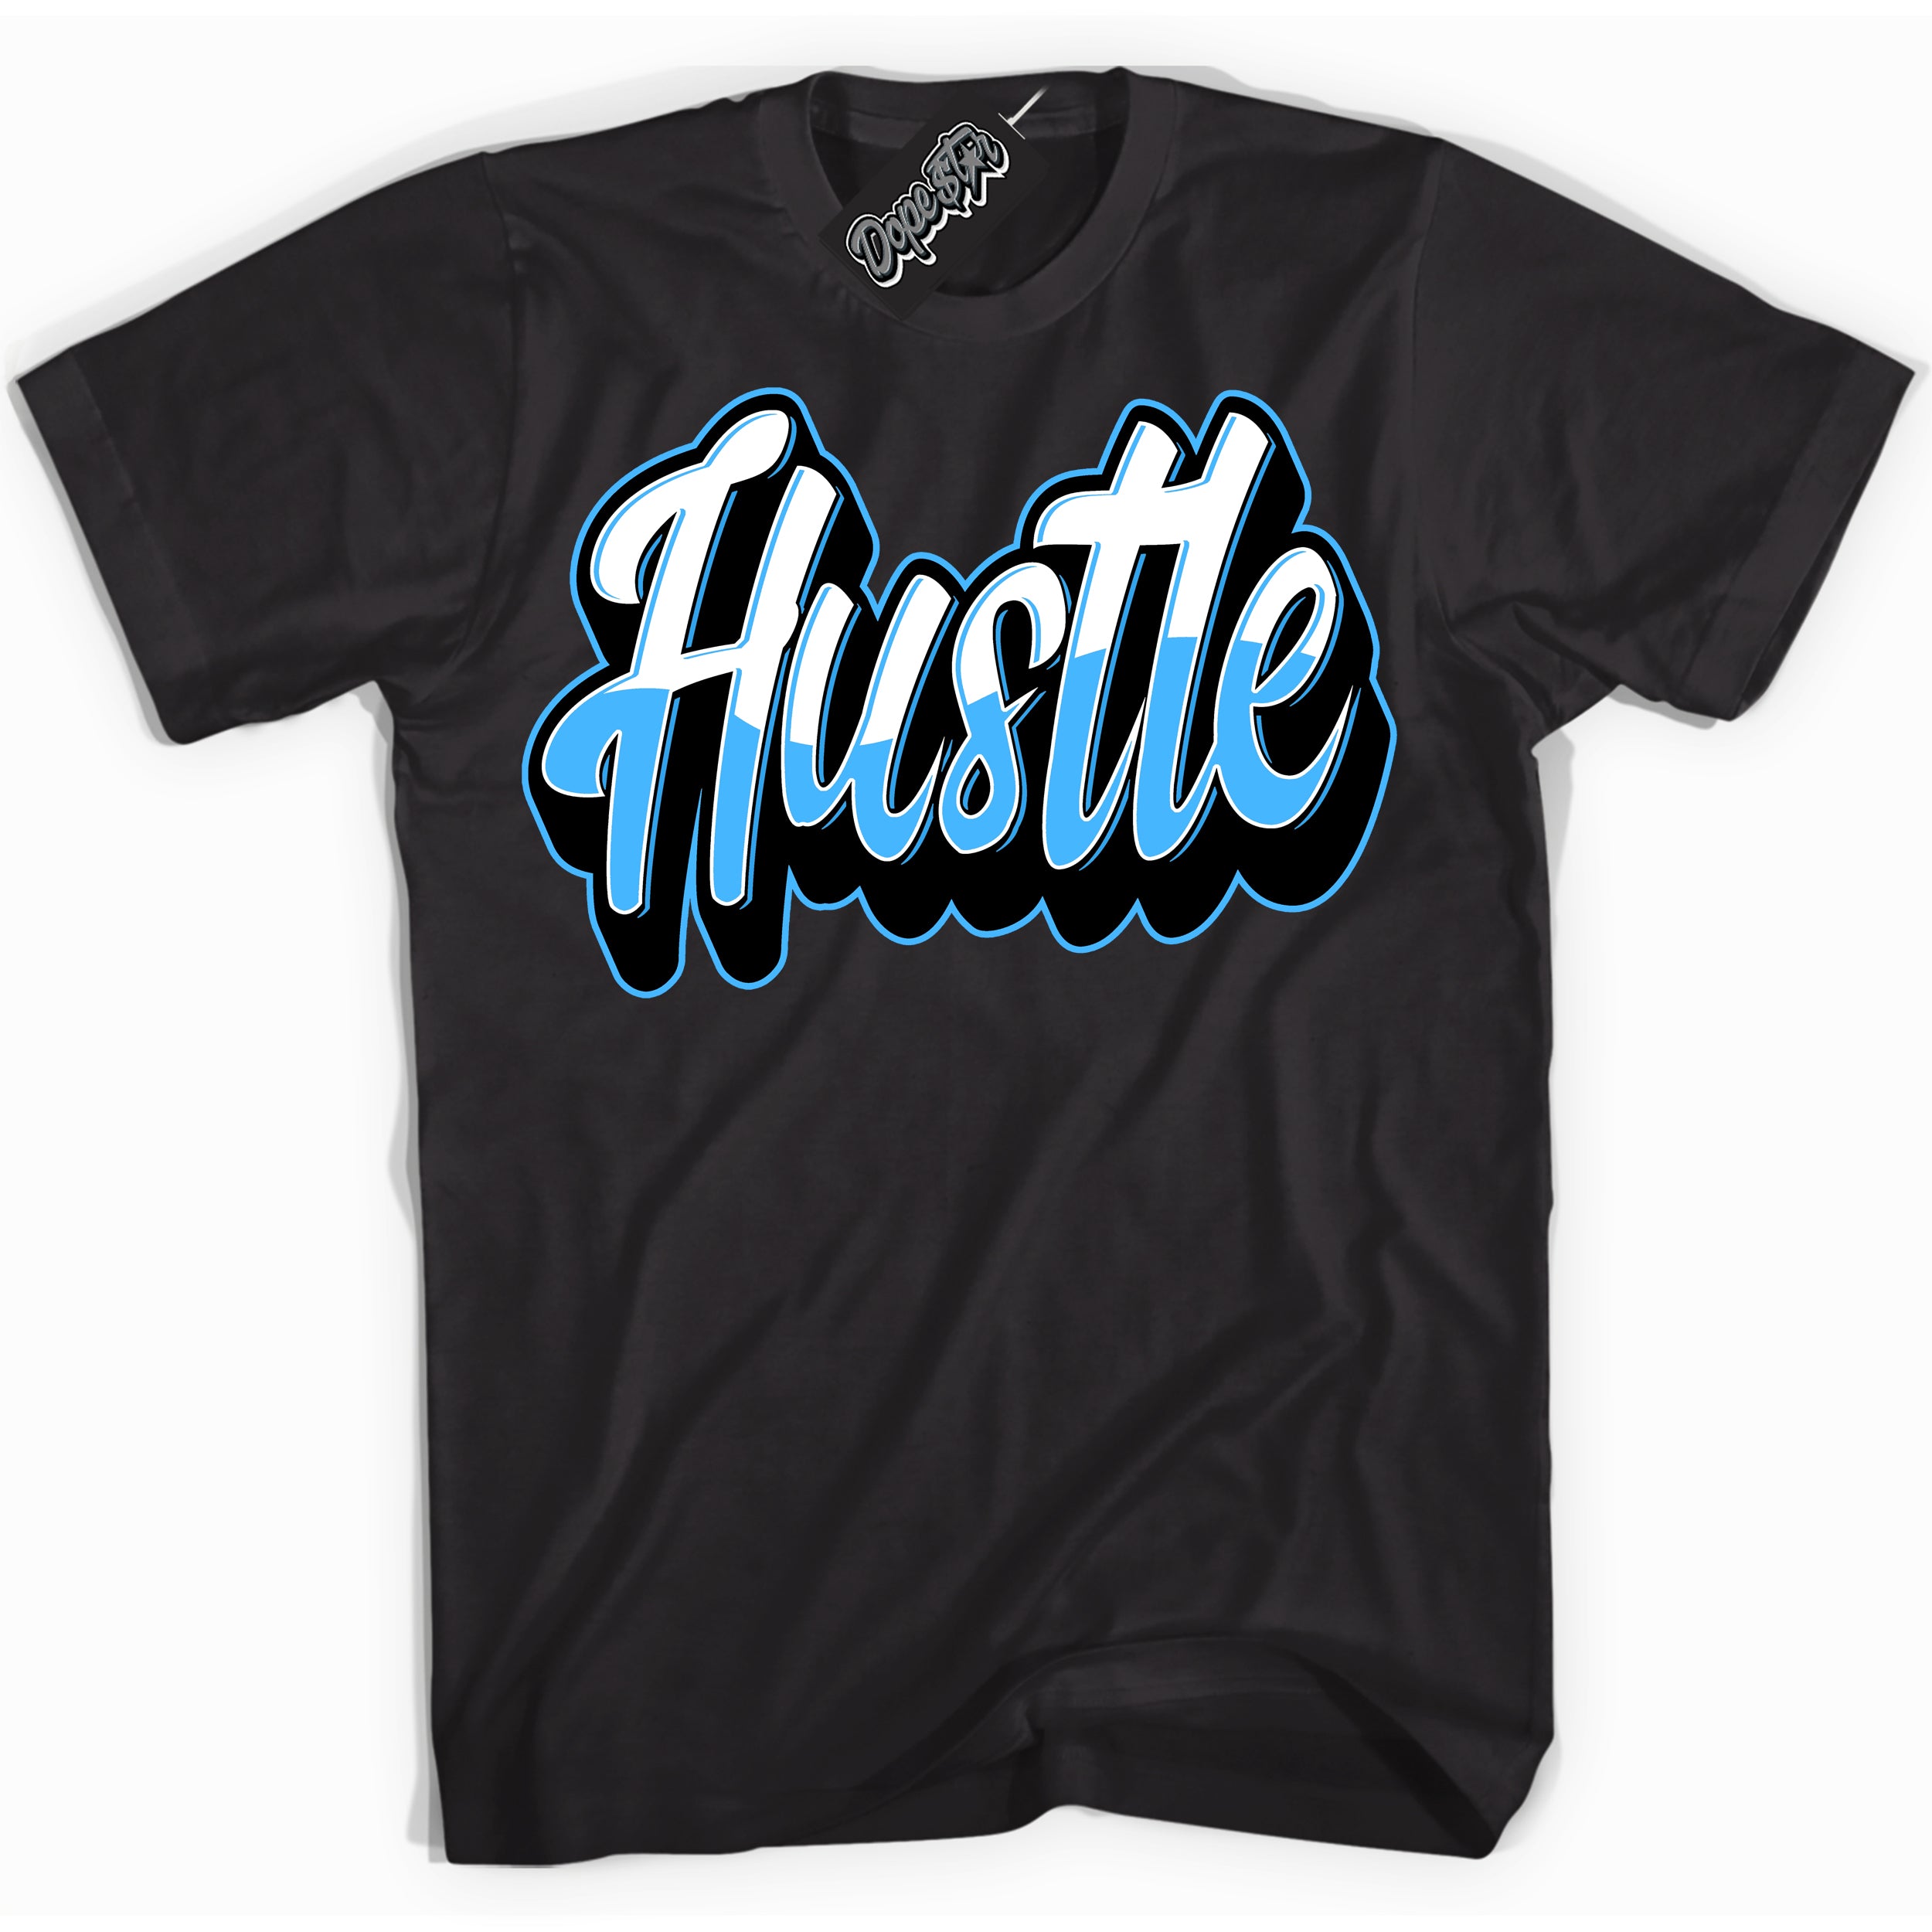 Cool Black graphic tee with “ Hustle 2 ” design, that perfectly matches Powder Blue 9s sneakers 